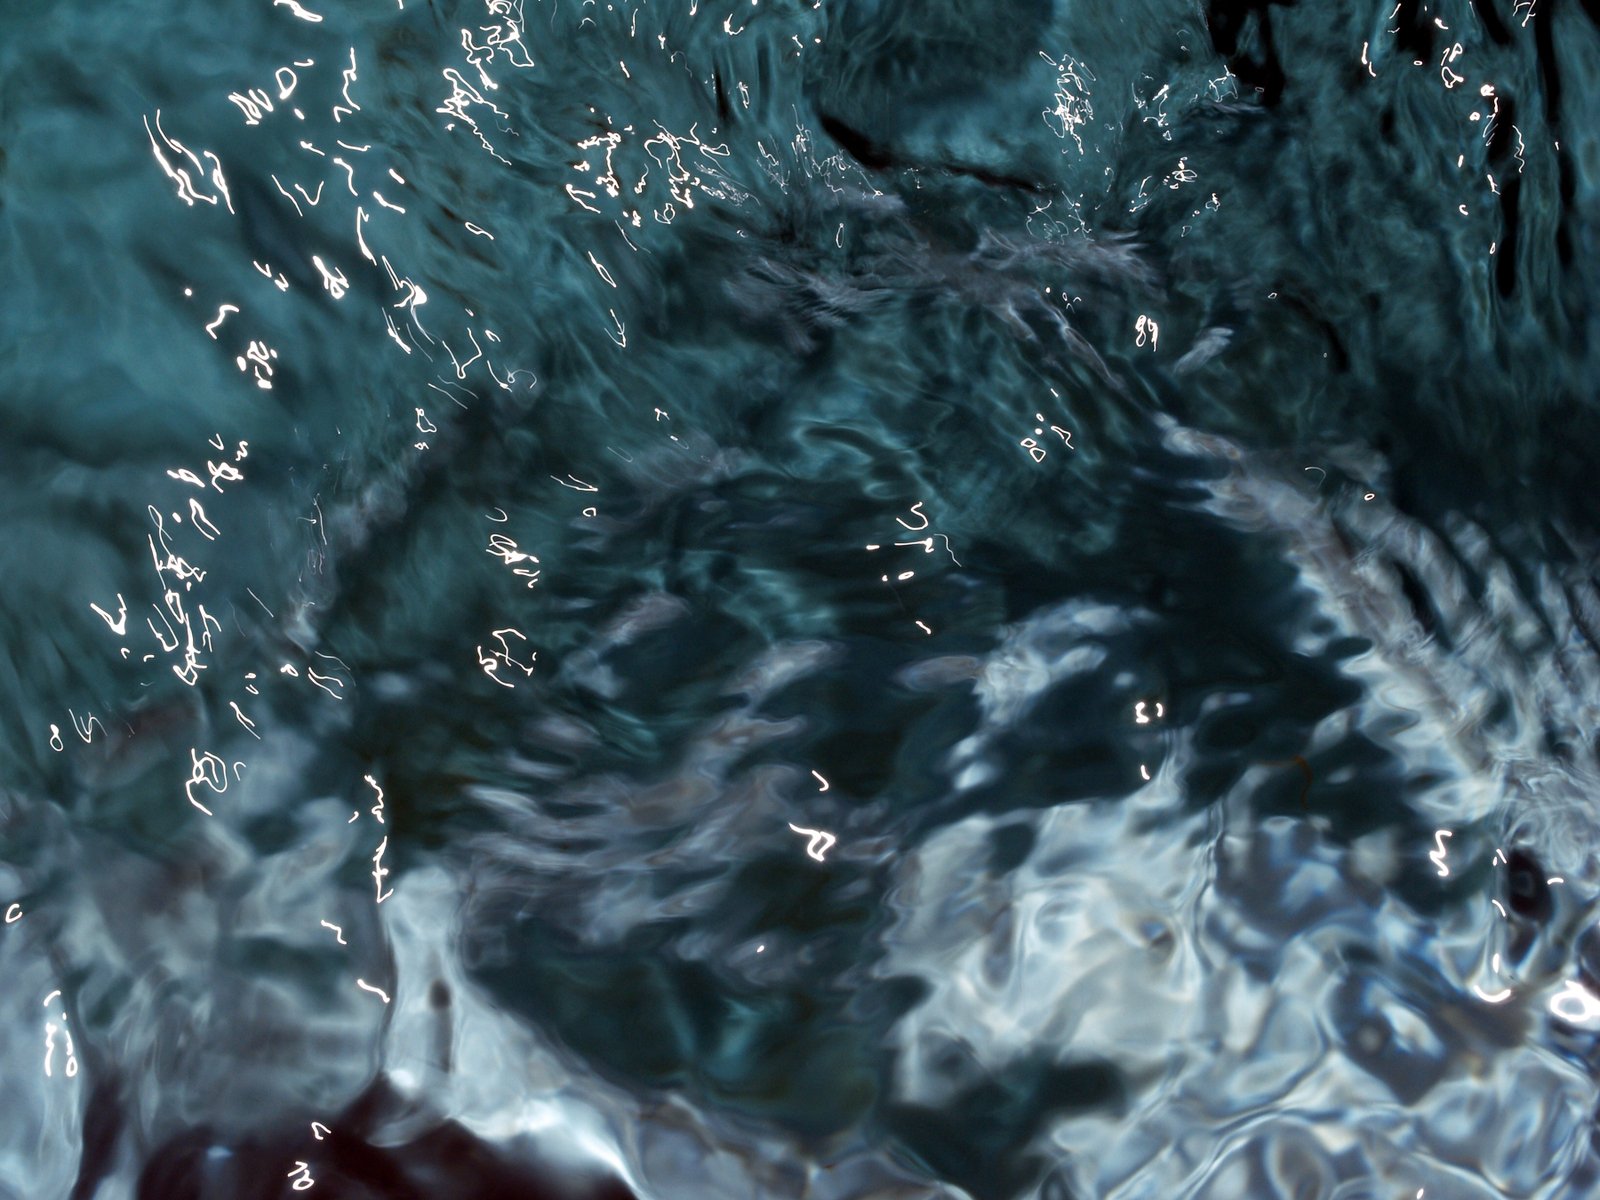 an image of water with waves on the surface